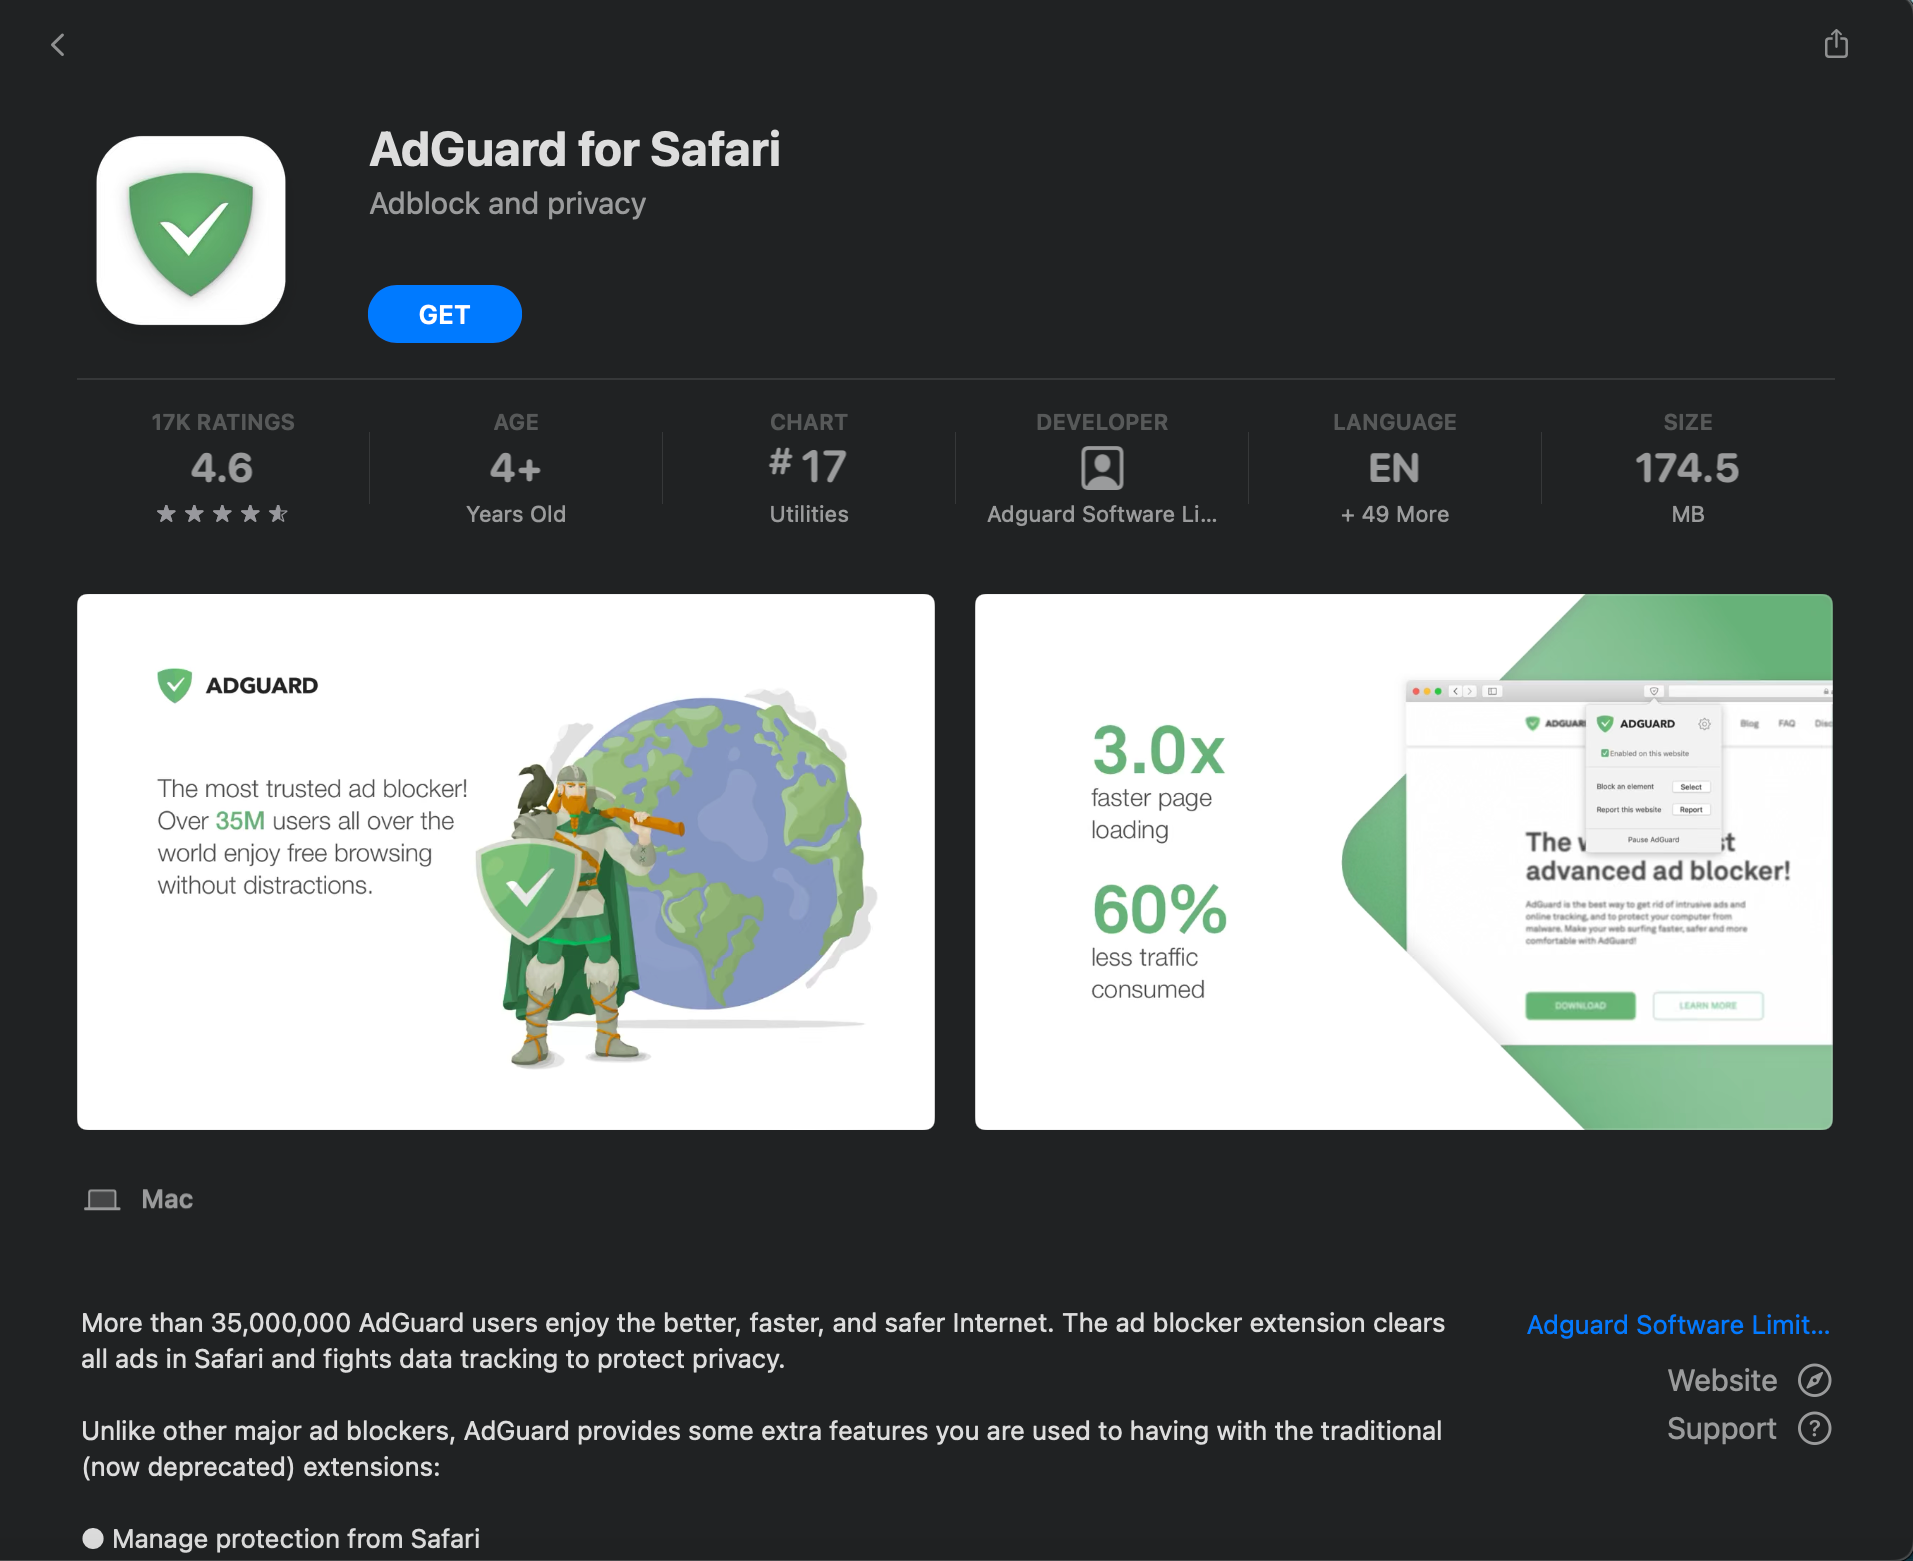 The Apple App Store page for AdGuard for Safari.